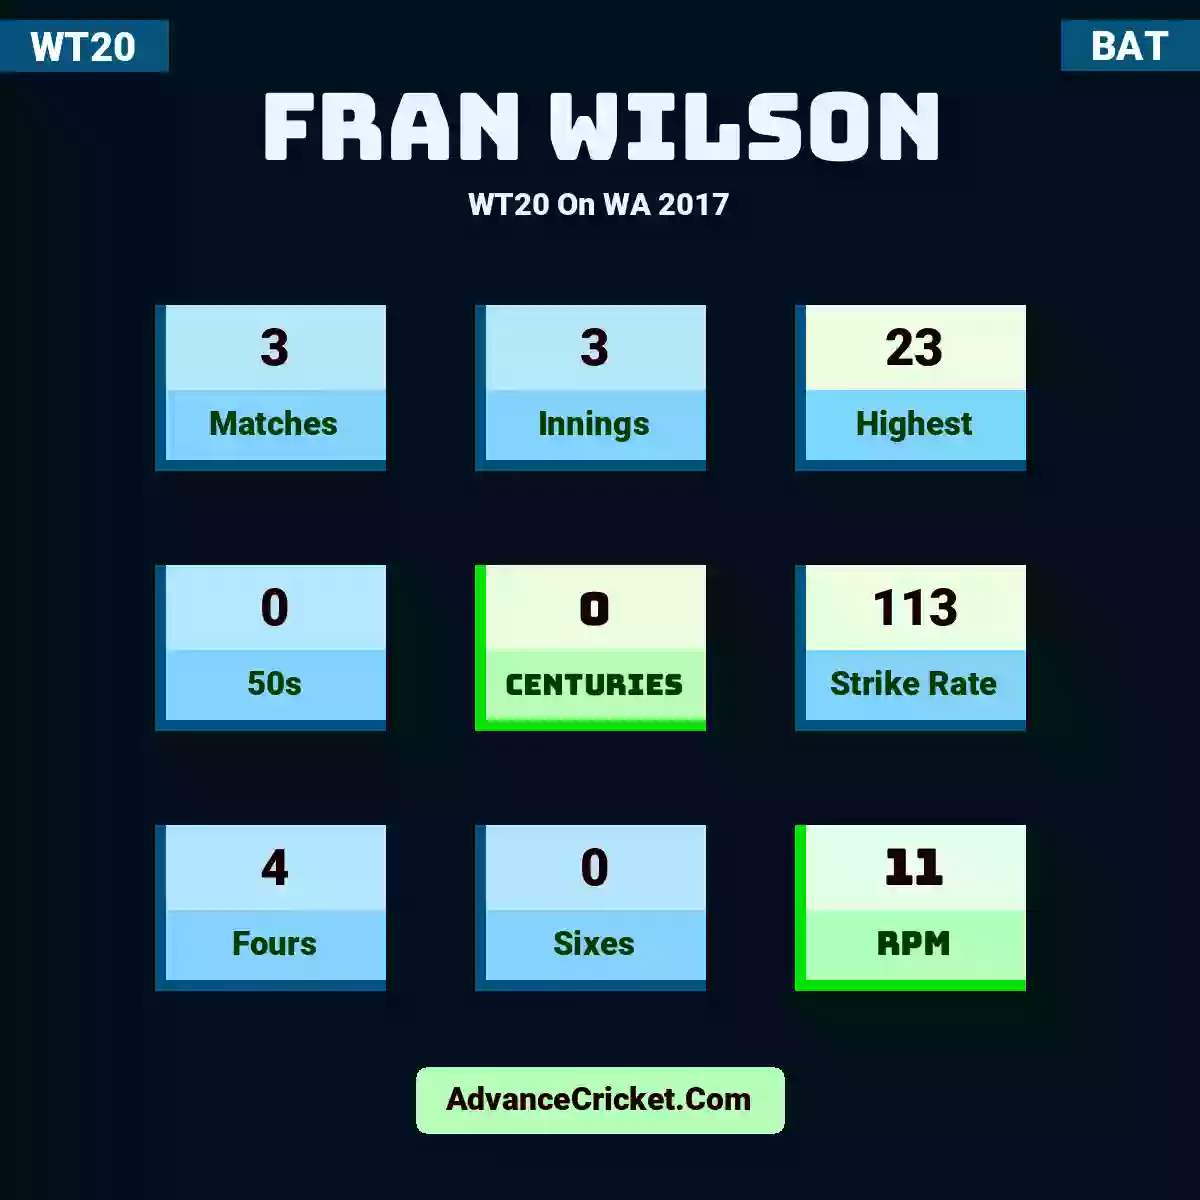 Fran Wilson WT20  On WA 2017, Fran Wilson played 3 matches, scored 23 runs as highest, 0 half-centuries, and 0 centuries, with a strike rate of 113. F.Wilson hit 4 fours and 0 sixes, with an RPM of 11.